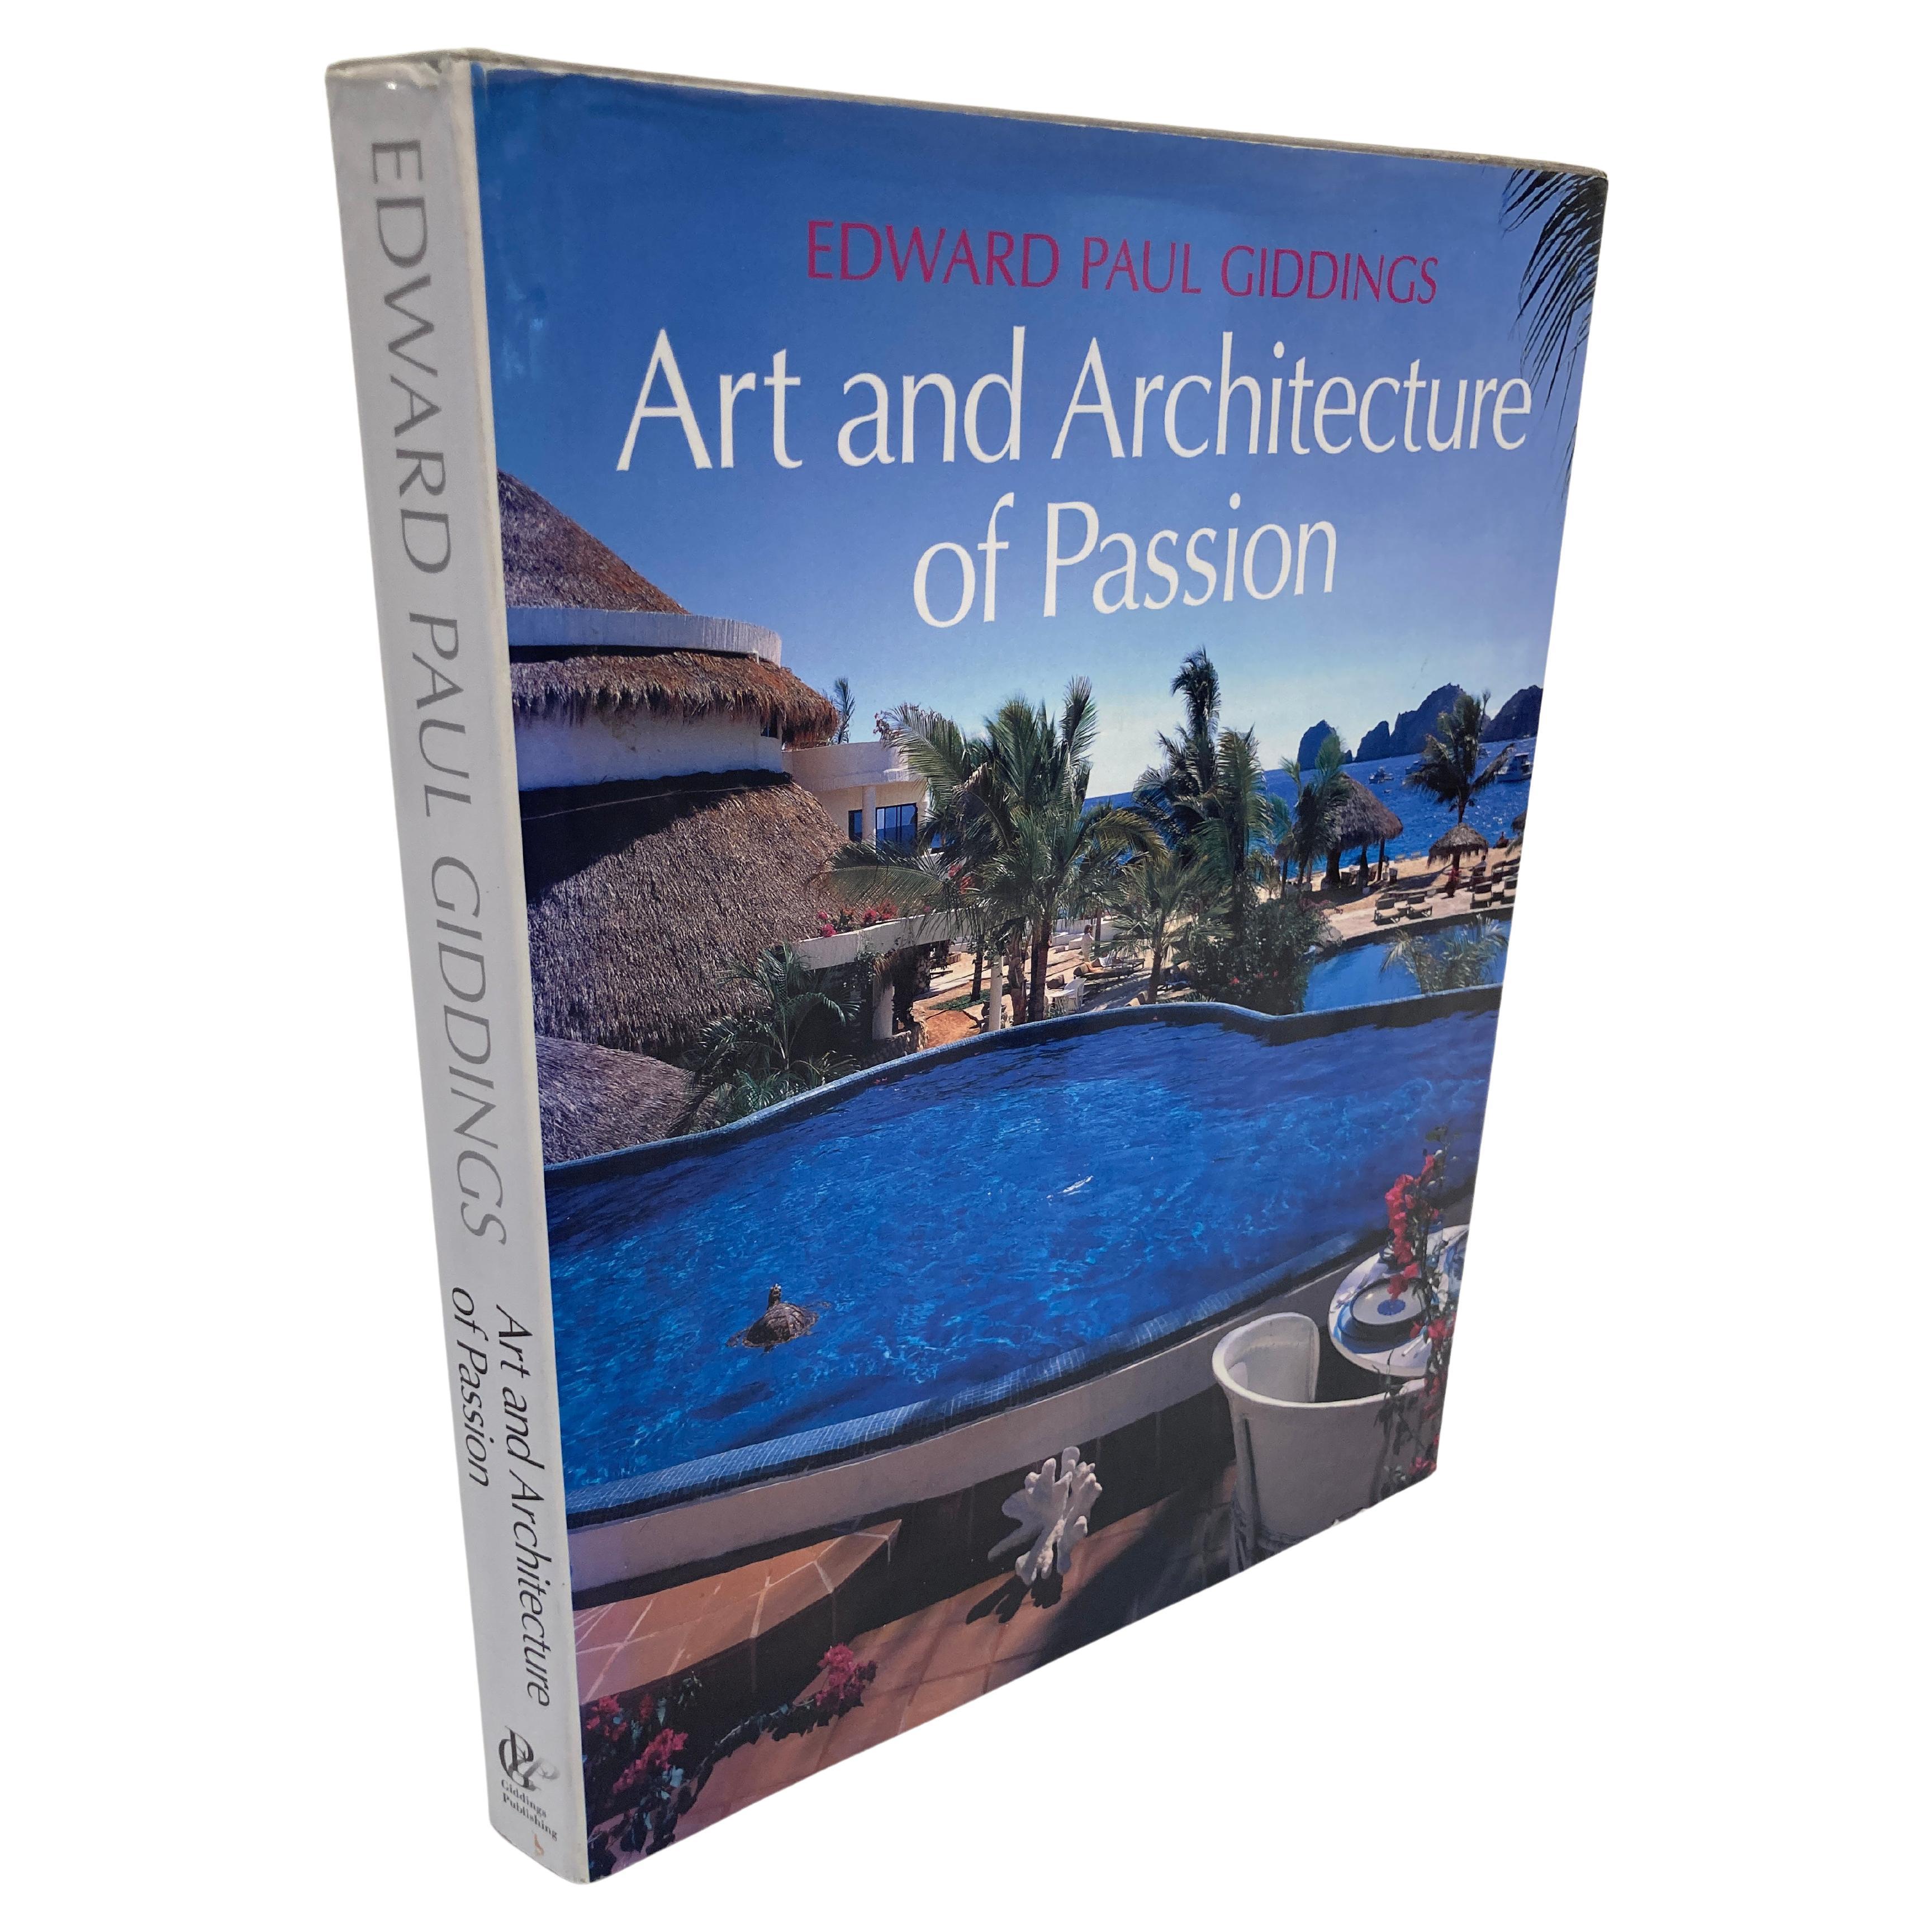 Hardcoverbuch "Art and Architecture of Passion" von Edward Paul Giddings